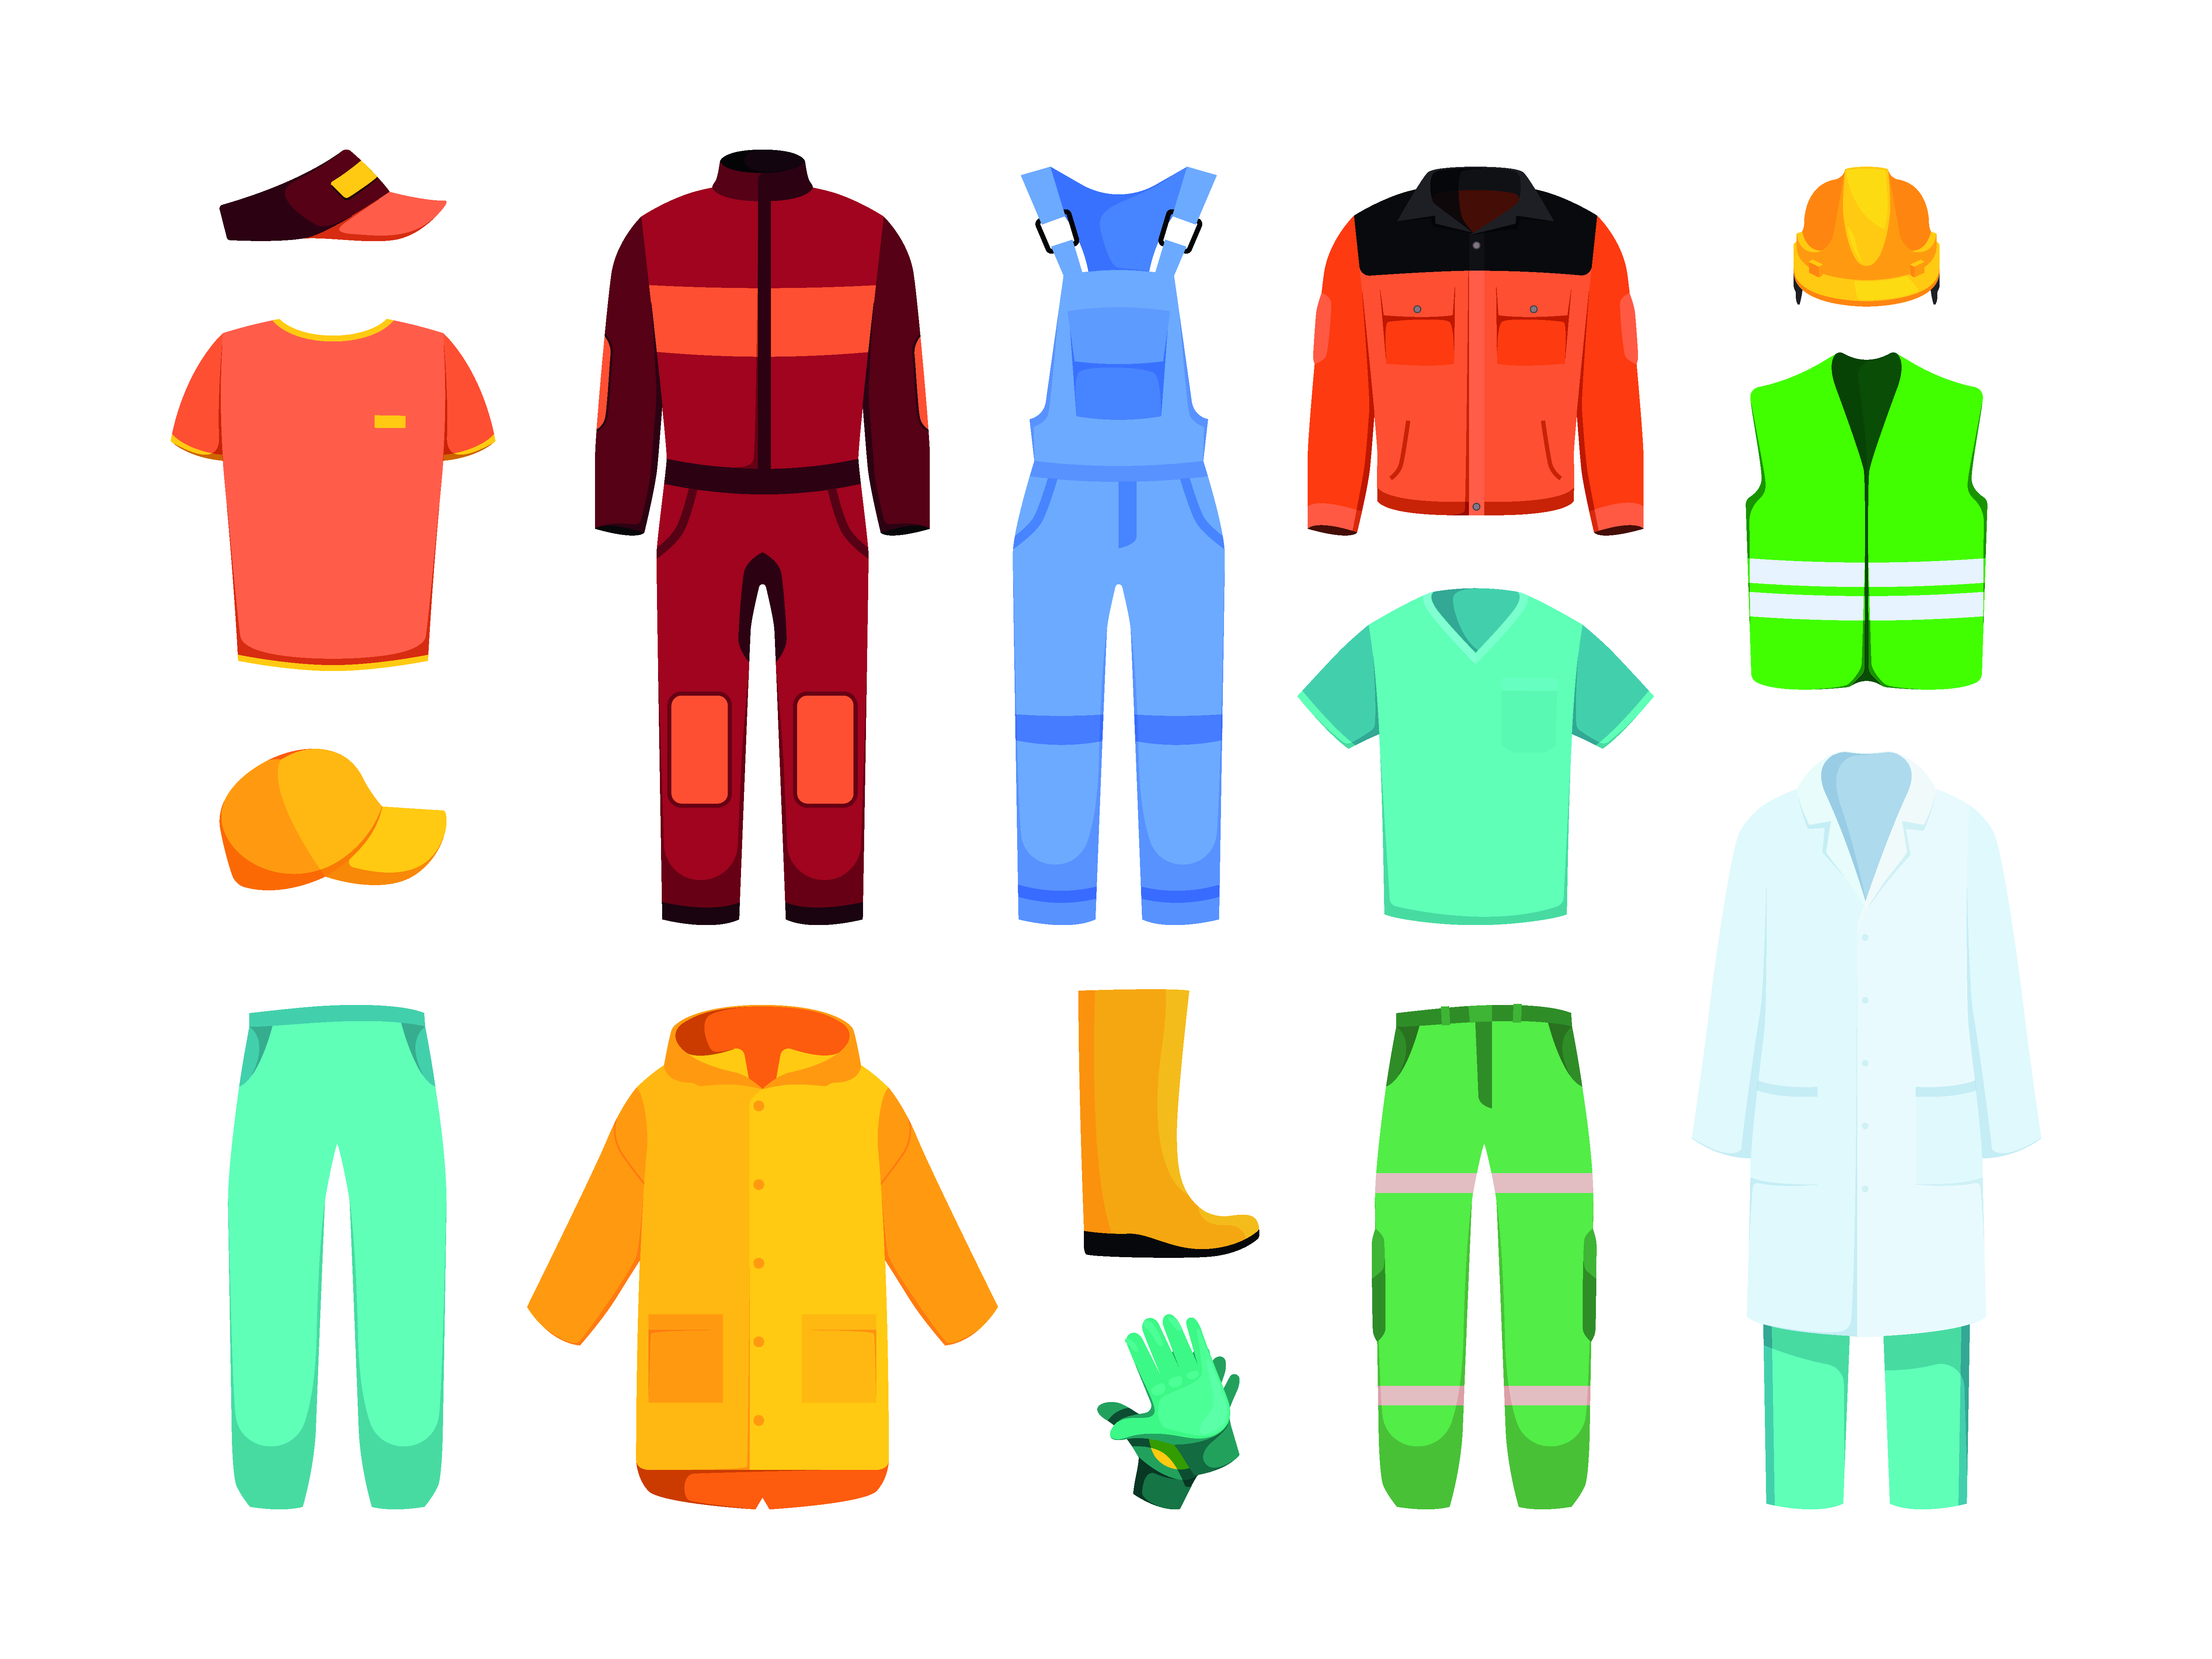 https://mendipsafetysupplies.com/product_images/uploaded_images/2112.m20.i417.n021.s.c15.industrial-workwear.-jackets-pants-helmets-professional-clothes-suit-for-workers-couriers-builders-doctors-uniform-garish-vec.jpg